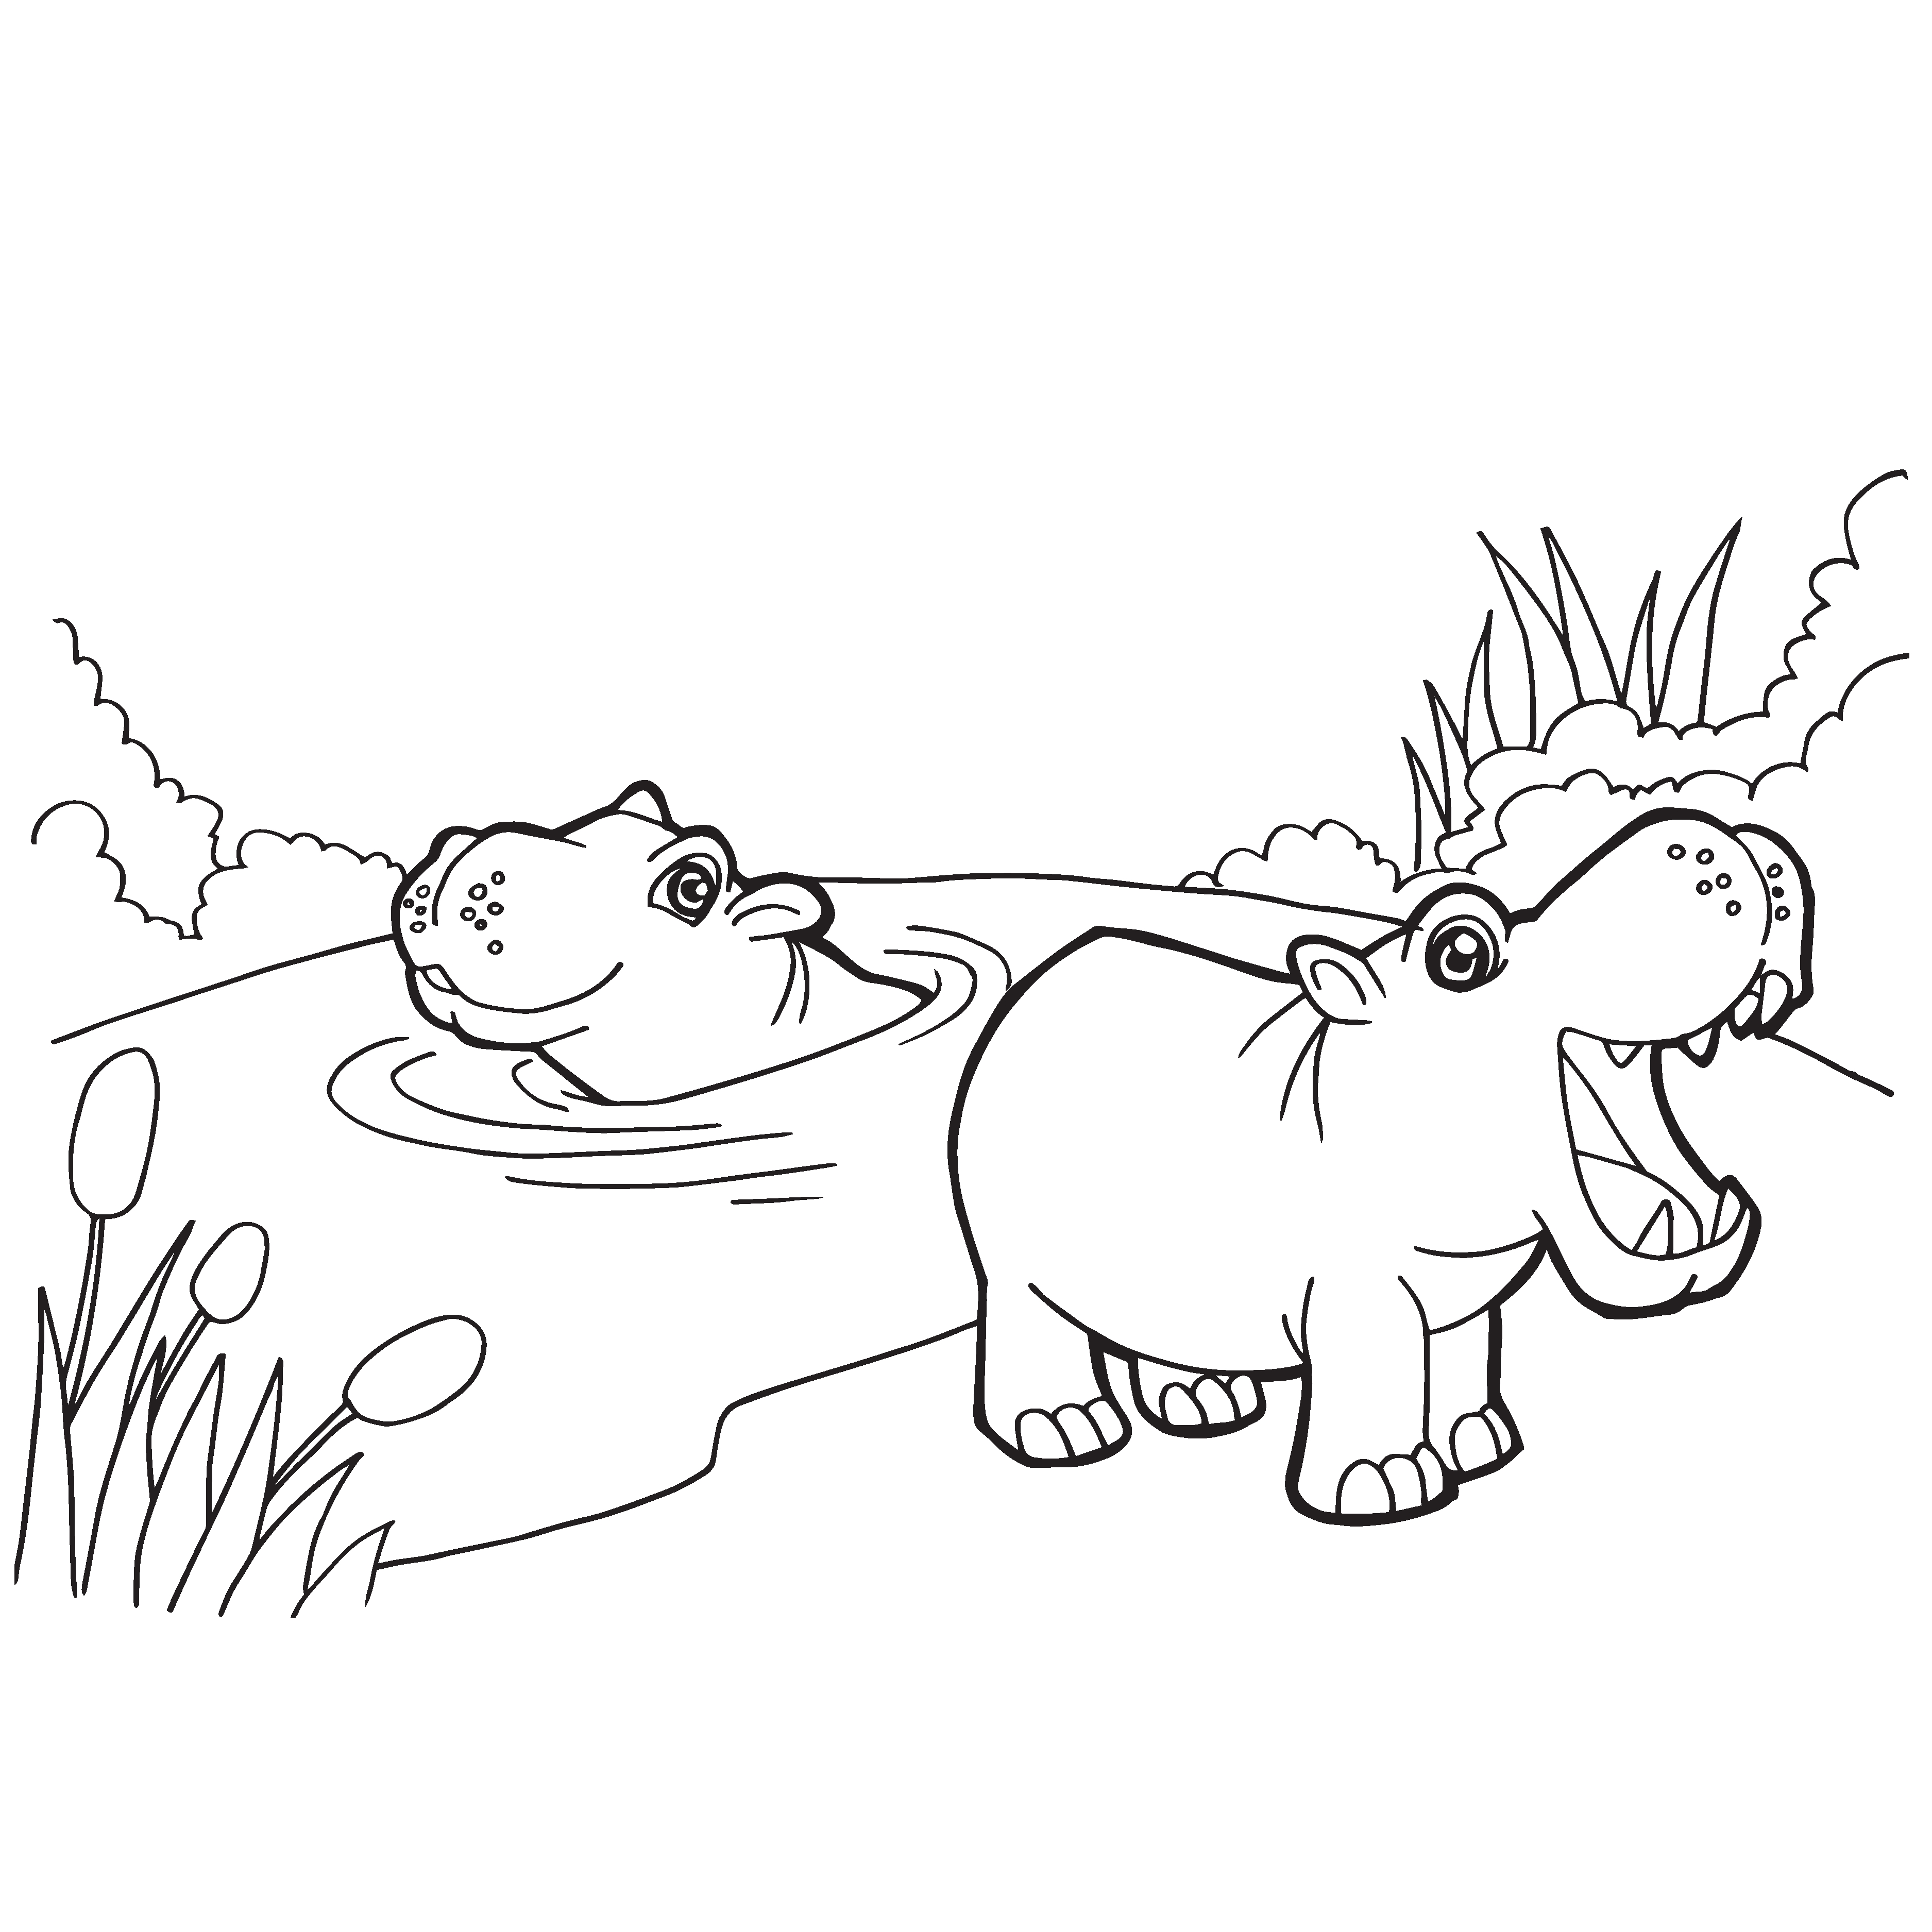 Hippo Coloring Pages To Print Coloring Pages